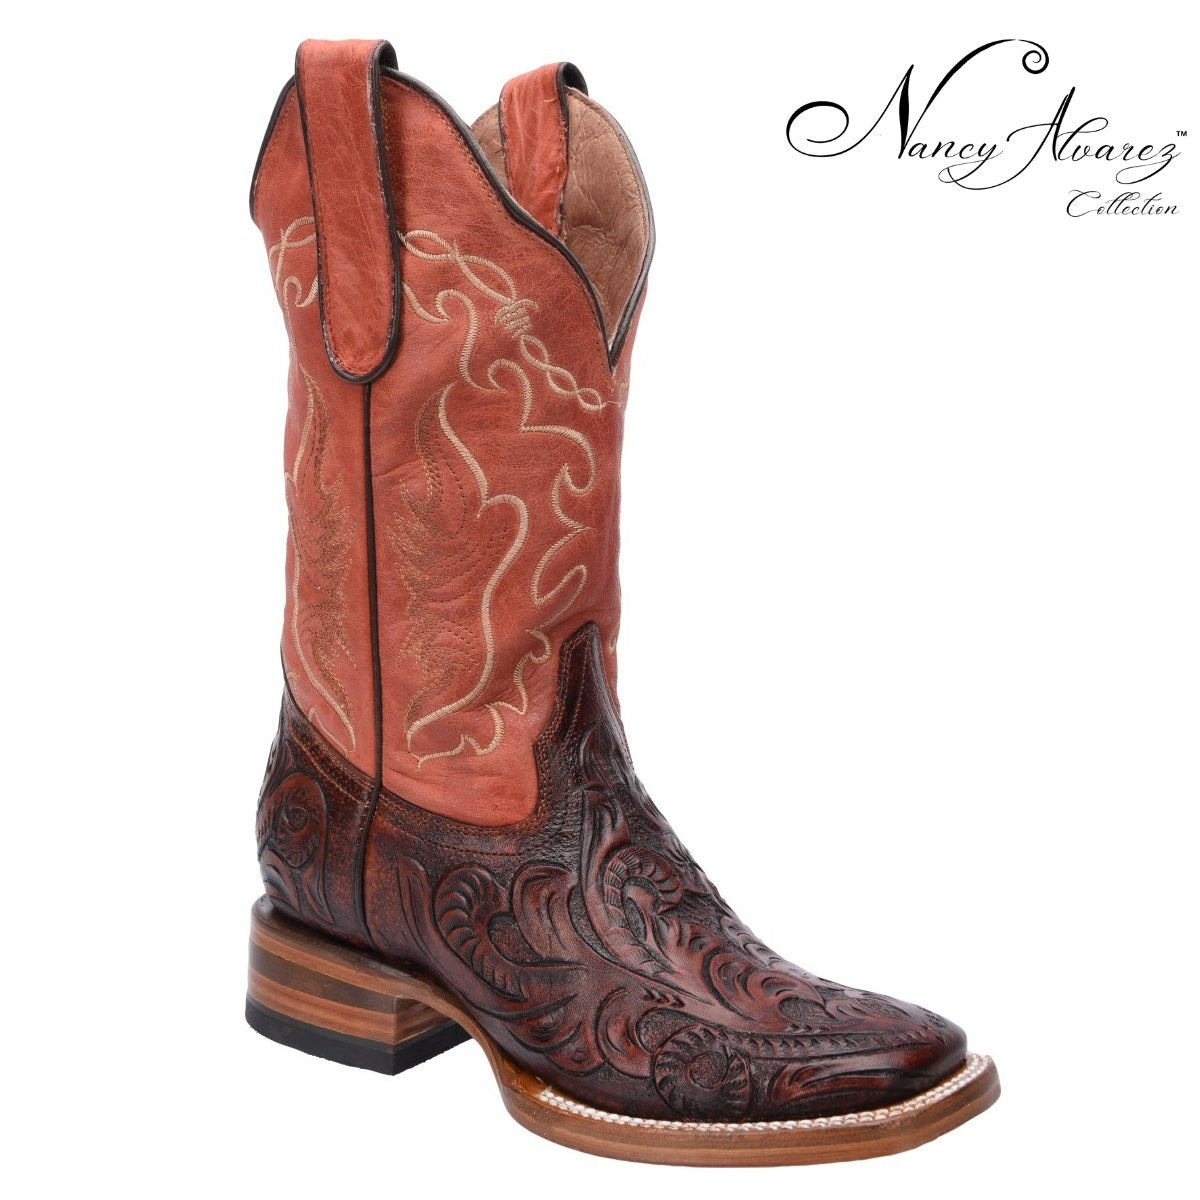 Western Boots - NA-WD0524-510